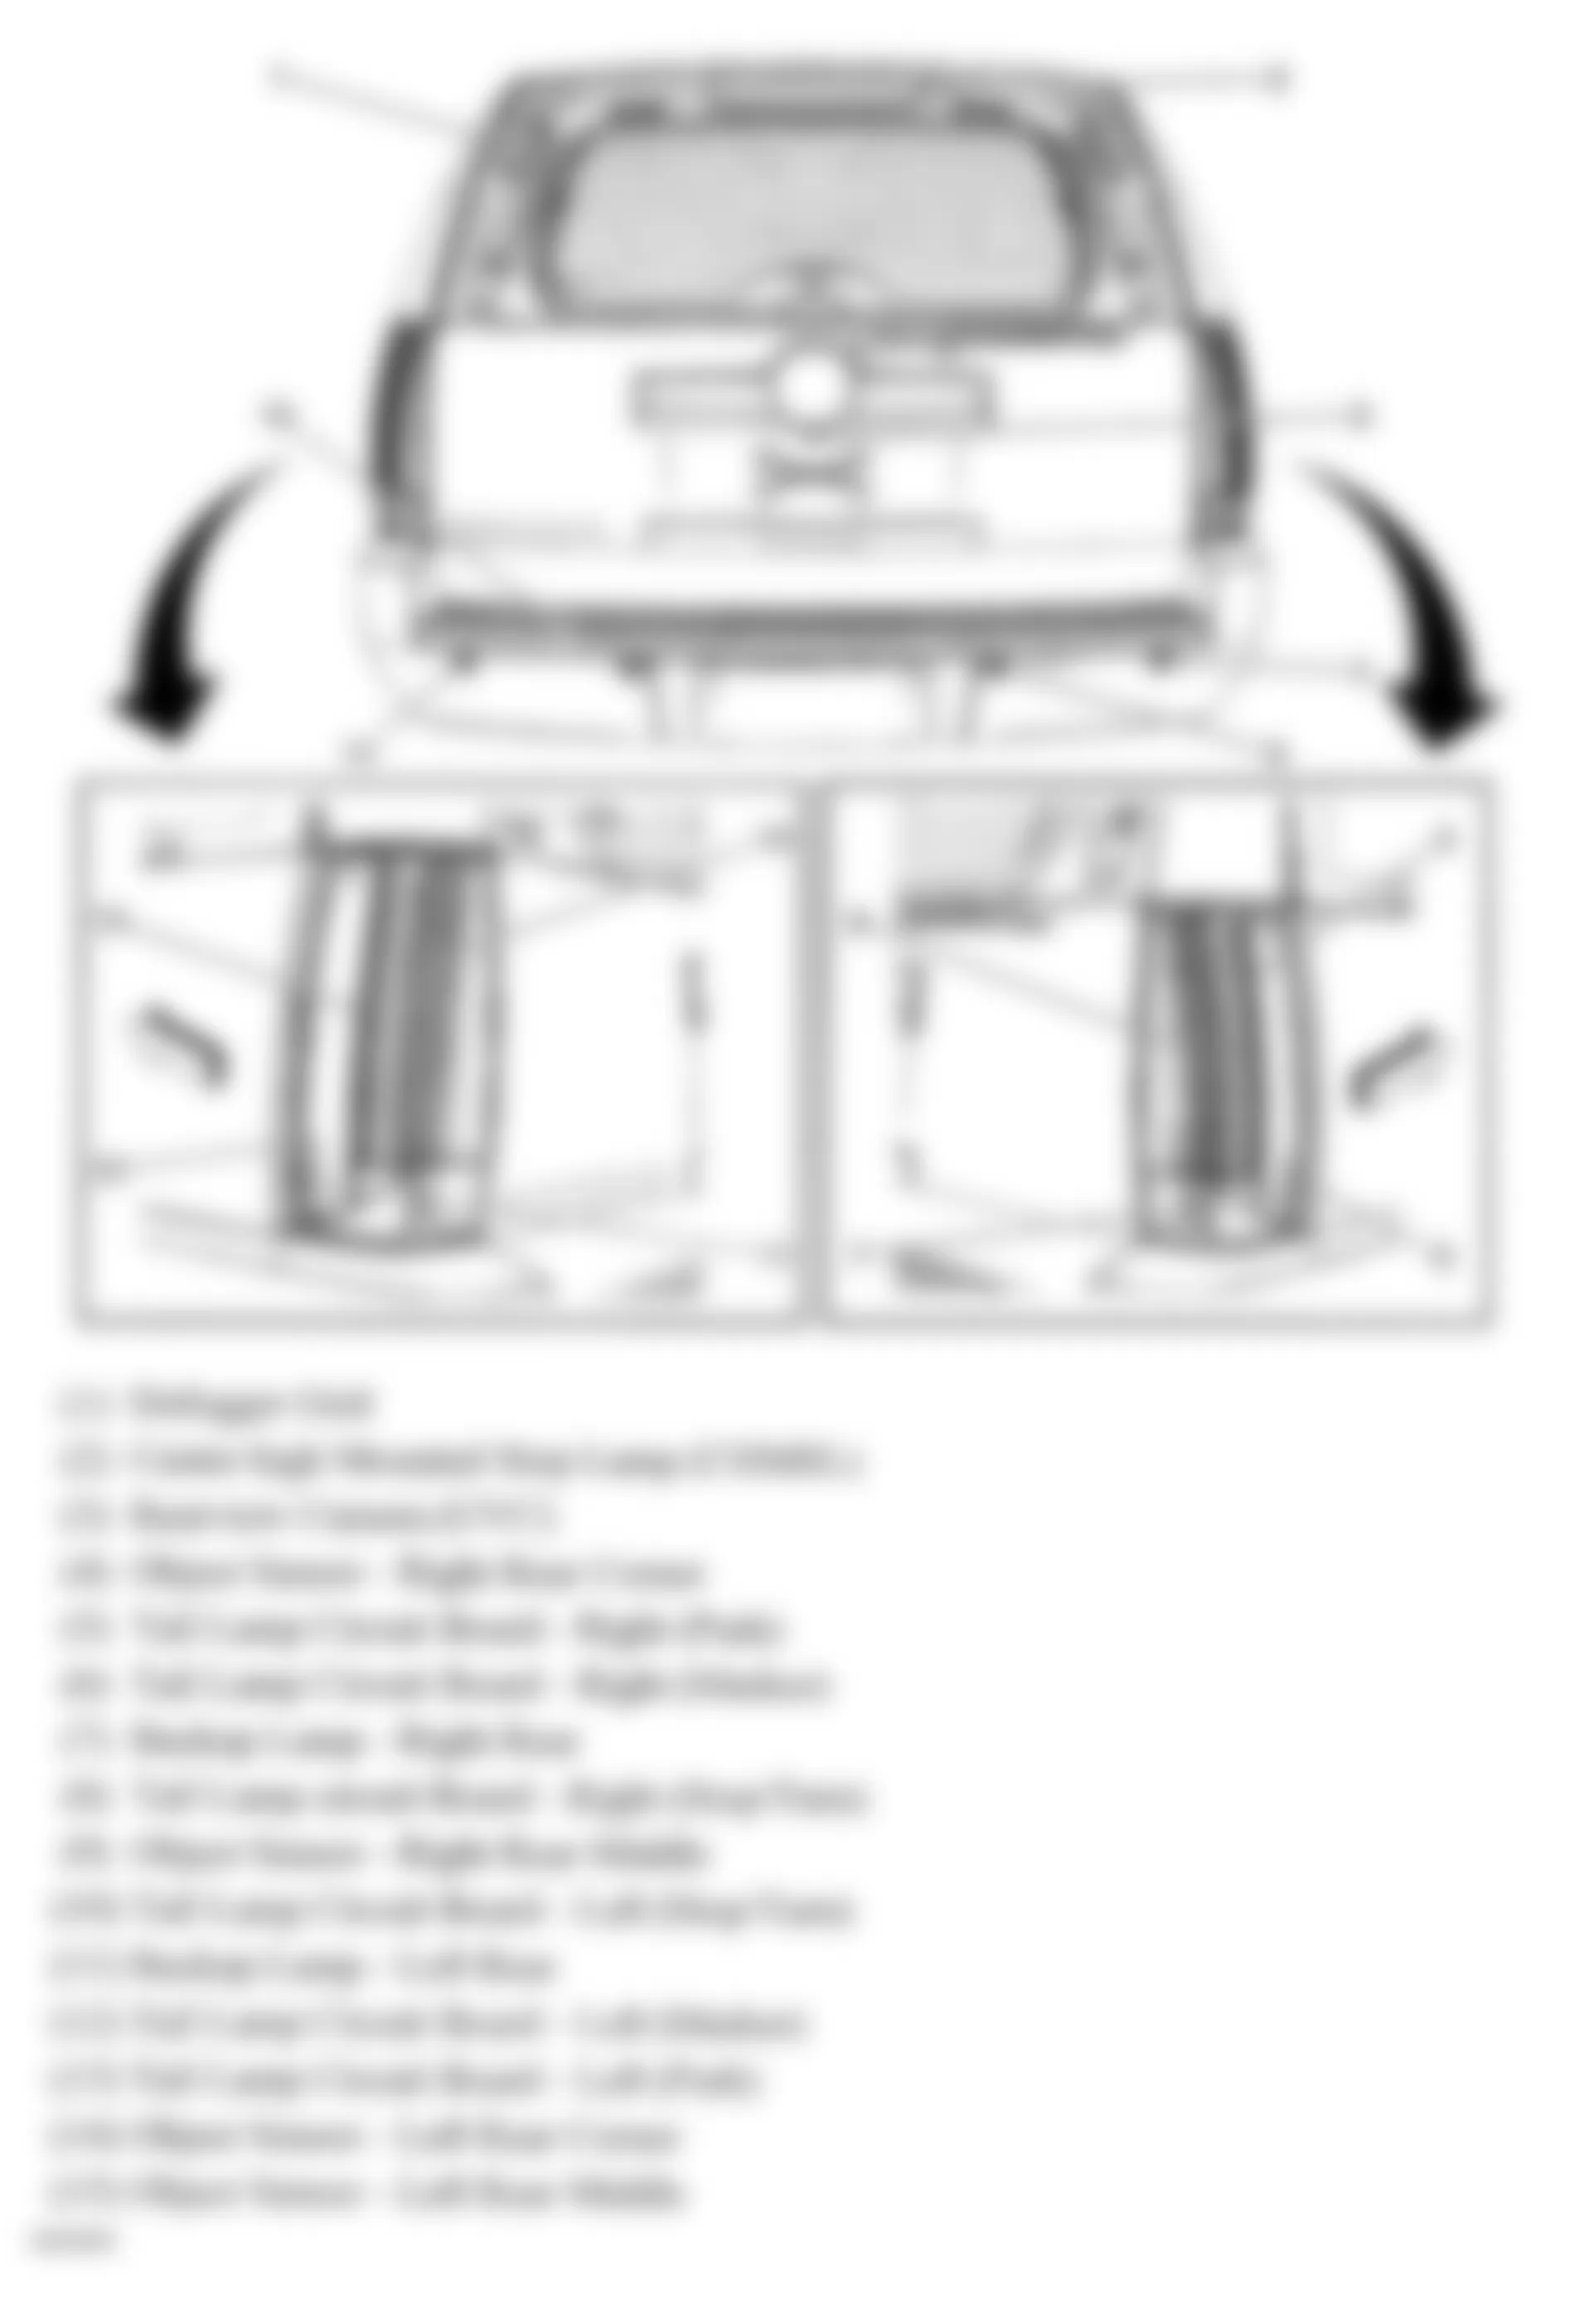 Chevrolet Tahoe 2008 - Component Locations -  Rear Of Vehicle (Tahoe & Escalade W/One Piece Liftgate)